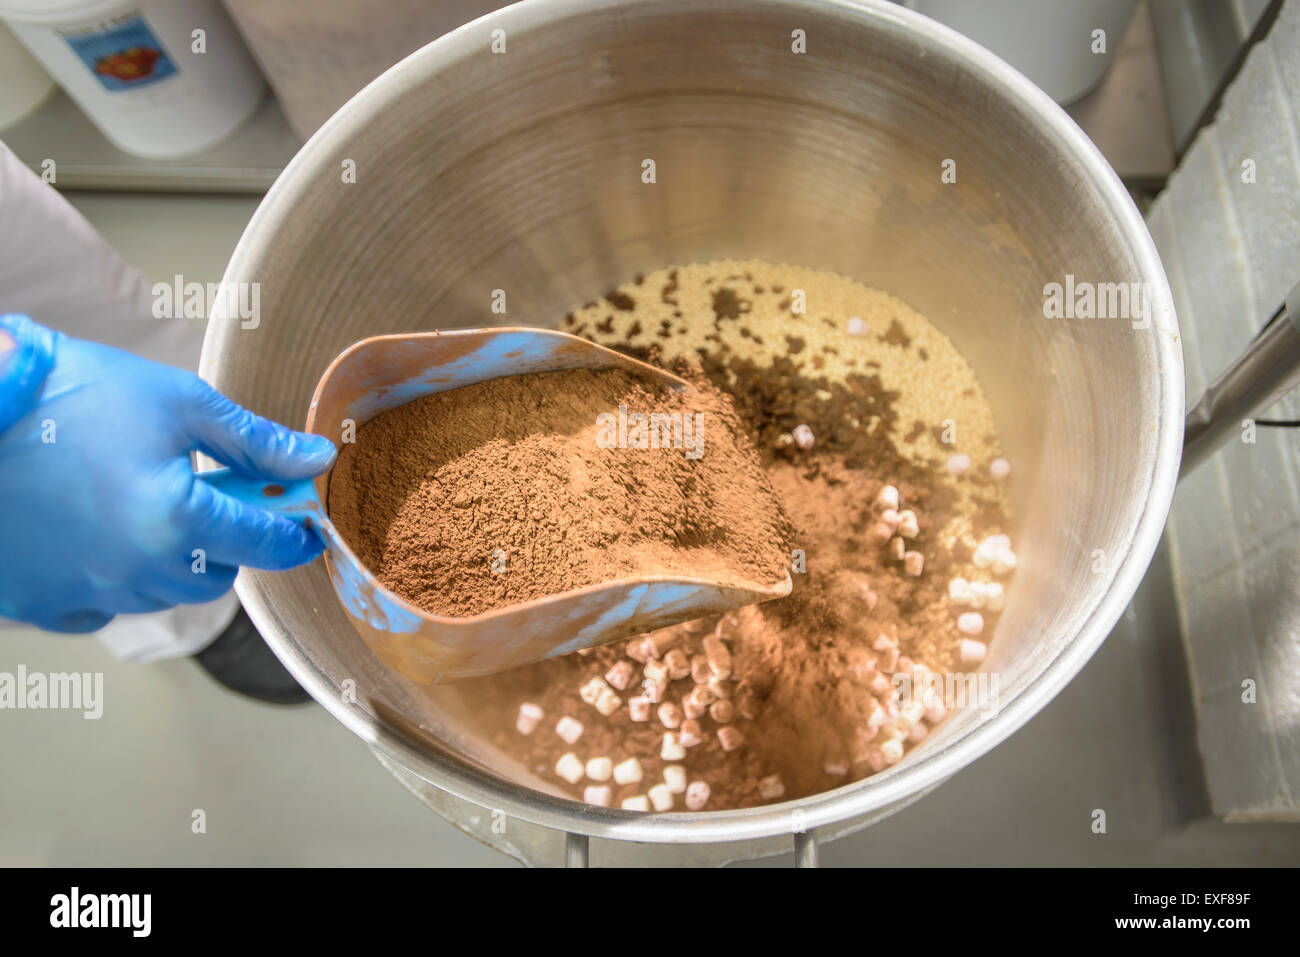 Cocoa powder being poured into cake mix in cake factory, close up Stock Photo